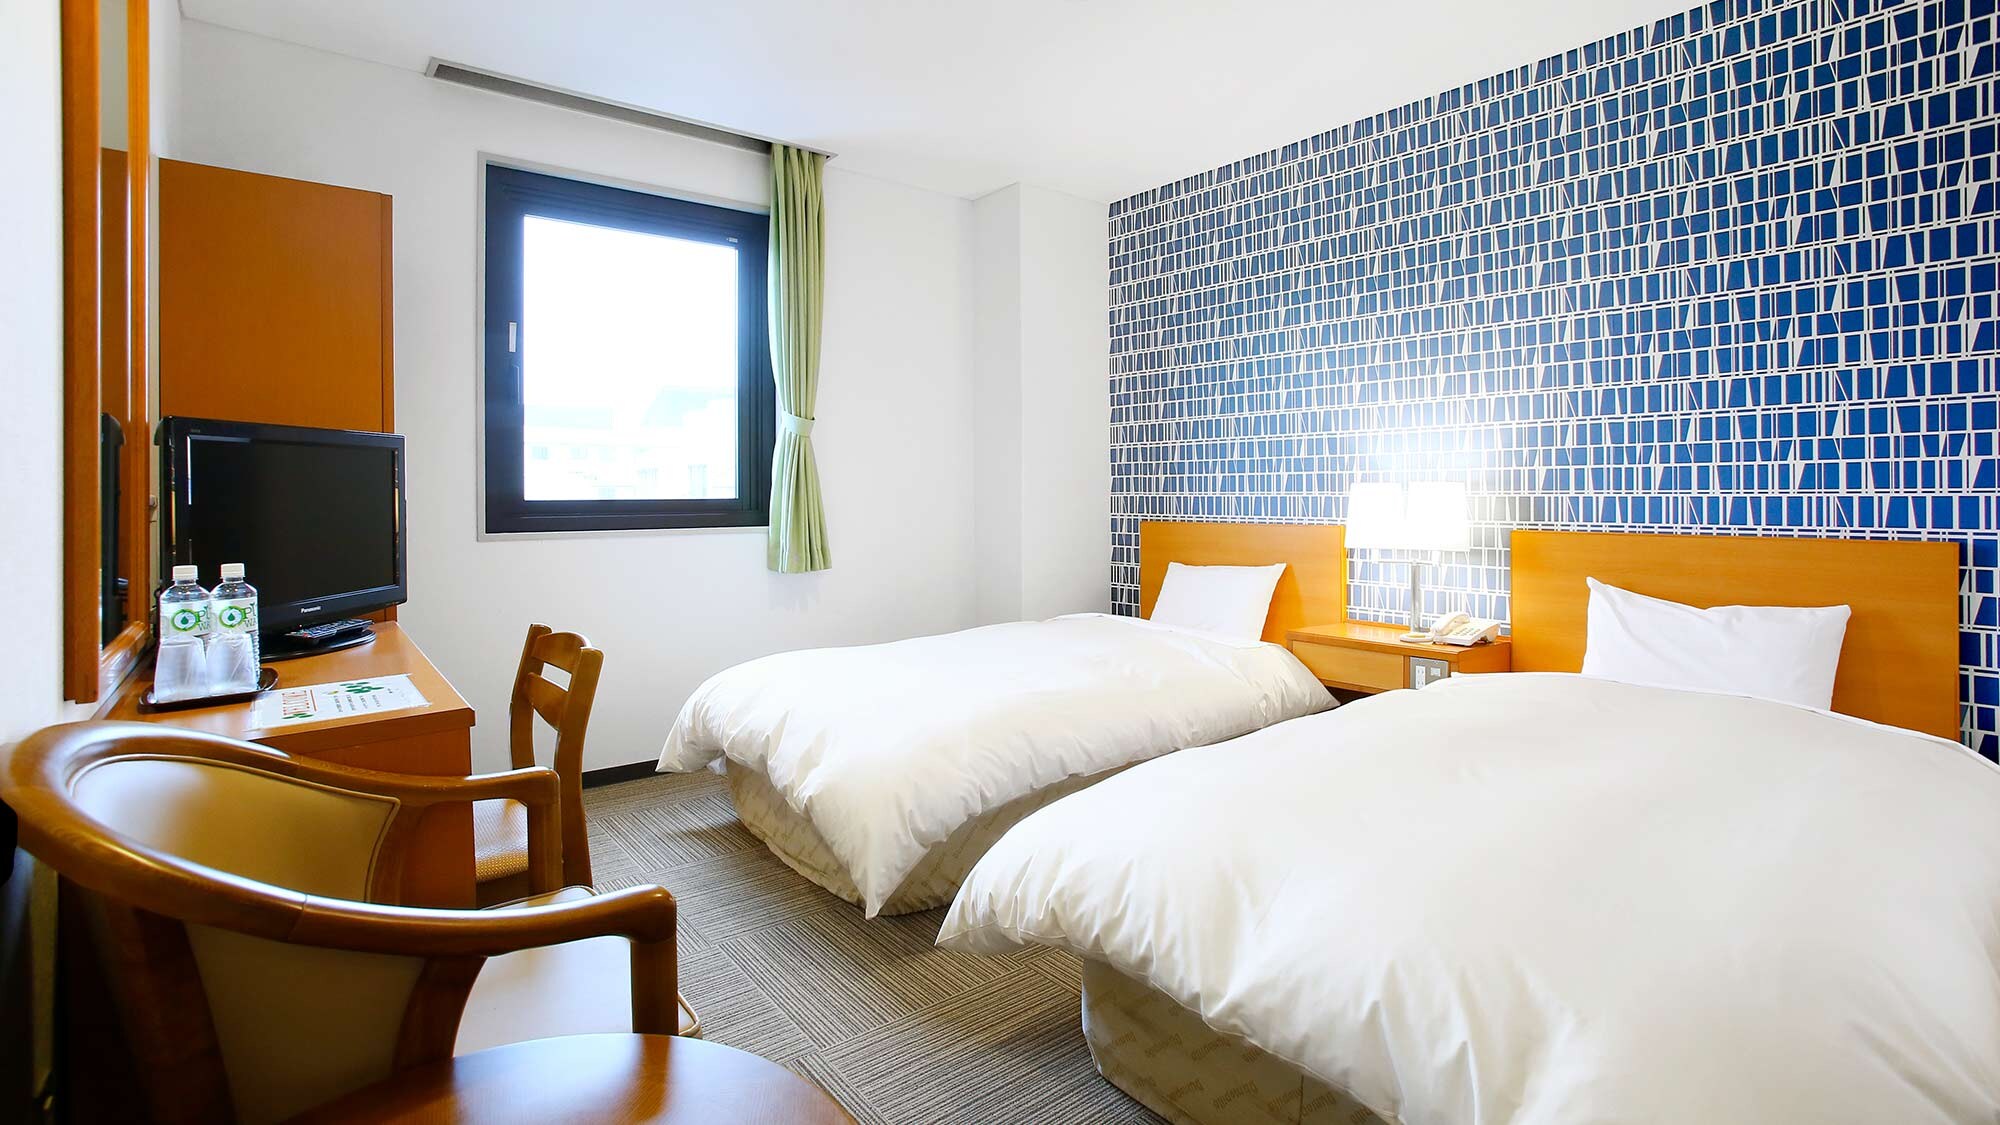 ・ Twin room: Please spend a relaxing time in a spacious room